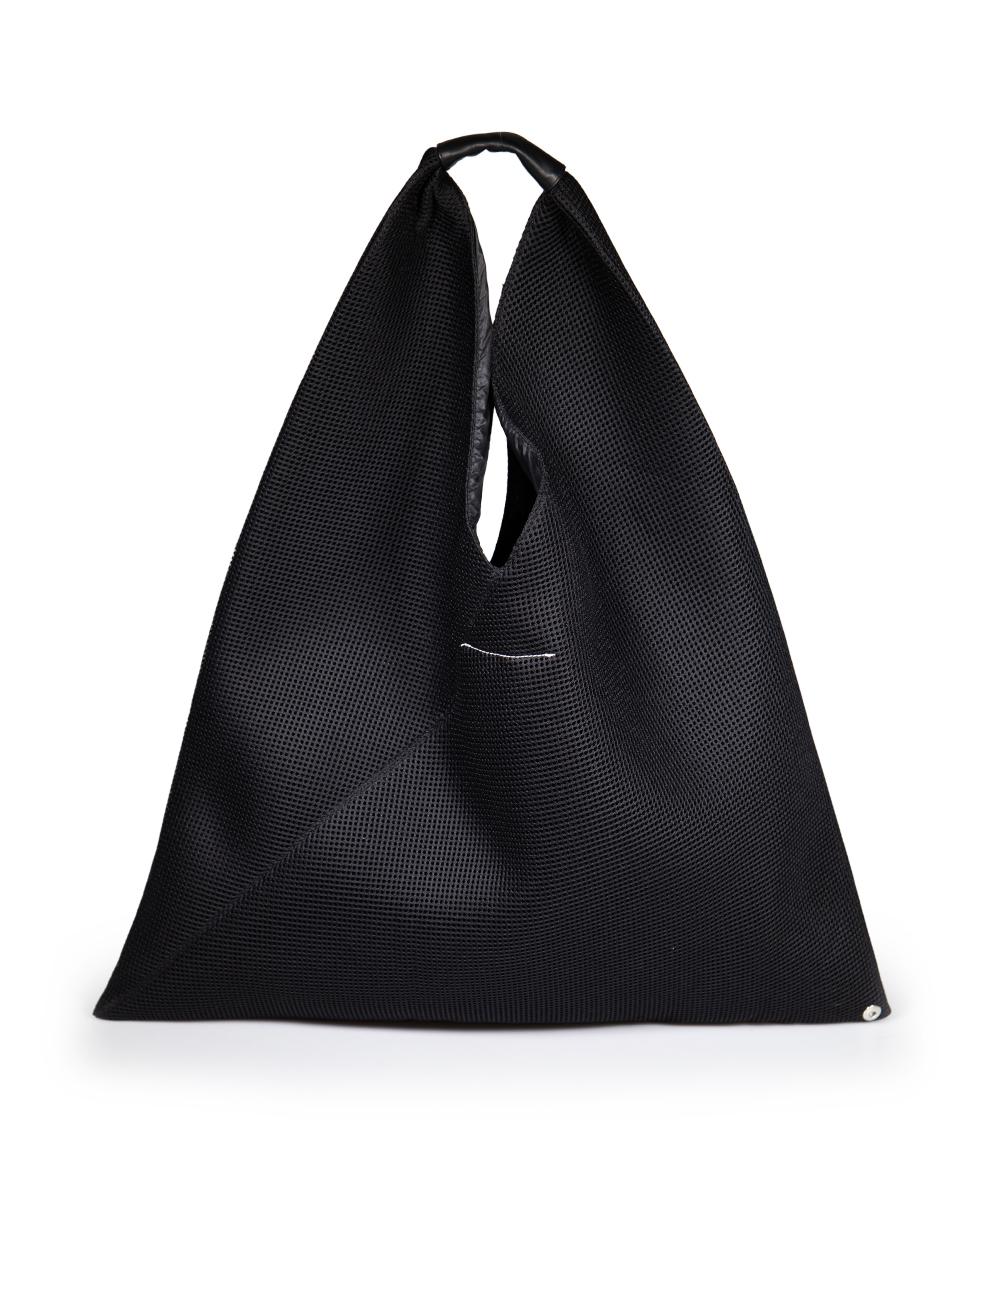 Maison Margiela Black Tote Bag In New Condition For Sale In London, GB